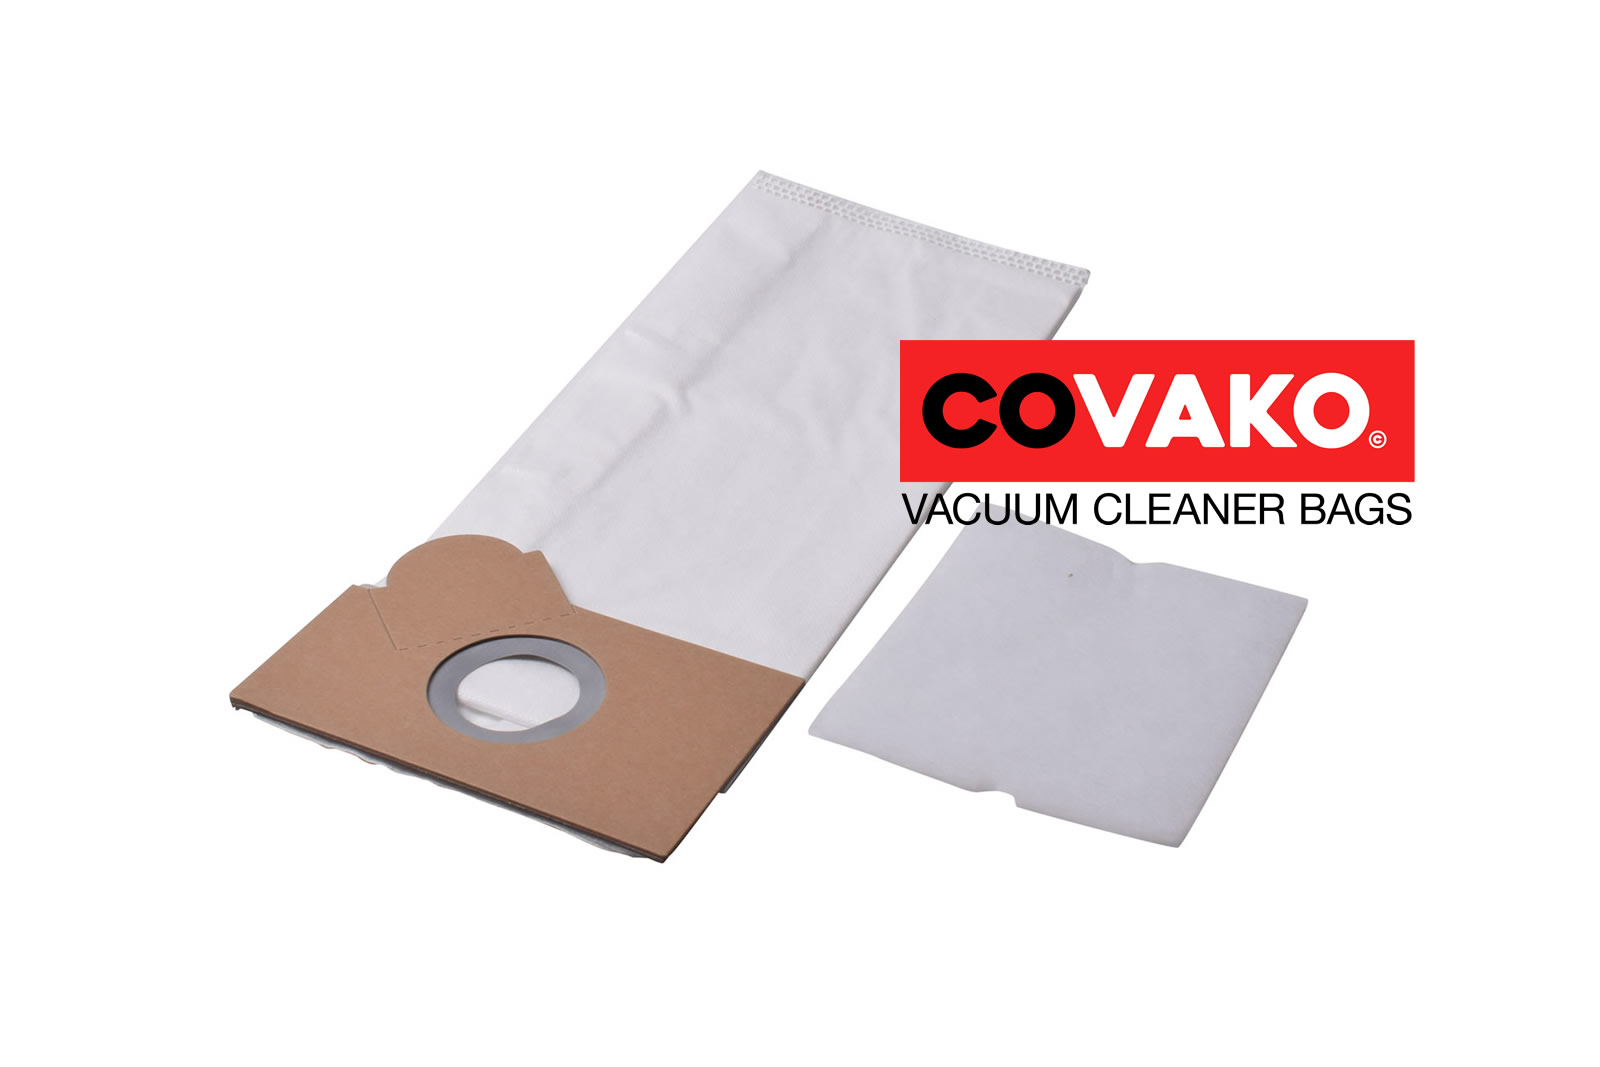 Fakir RS 17 F / Synthesis - Fakir vacuum cleaner bags